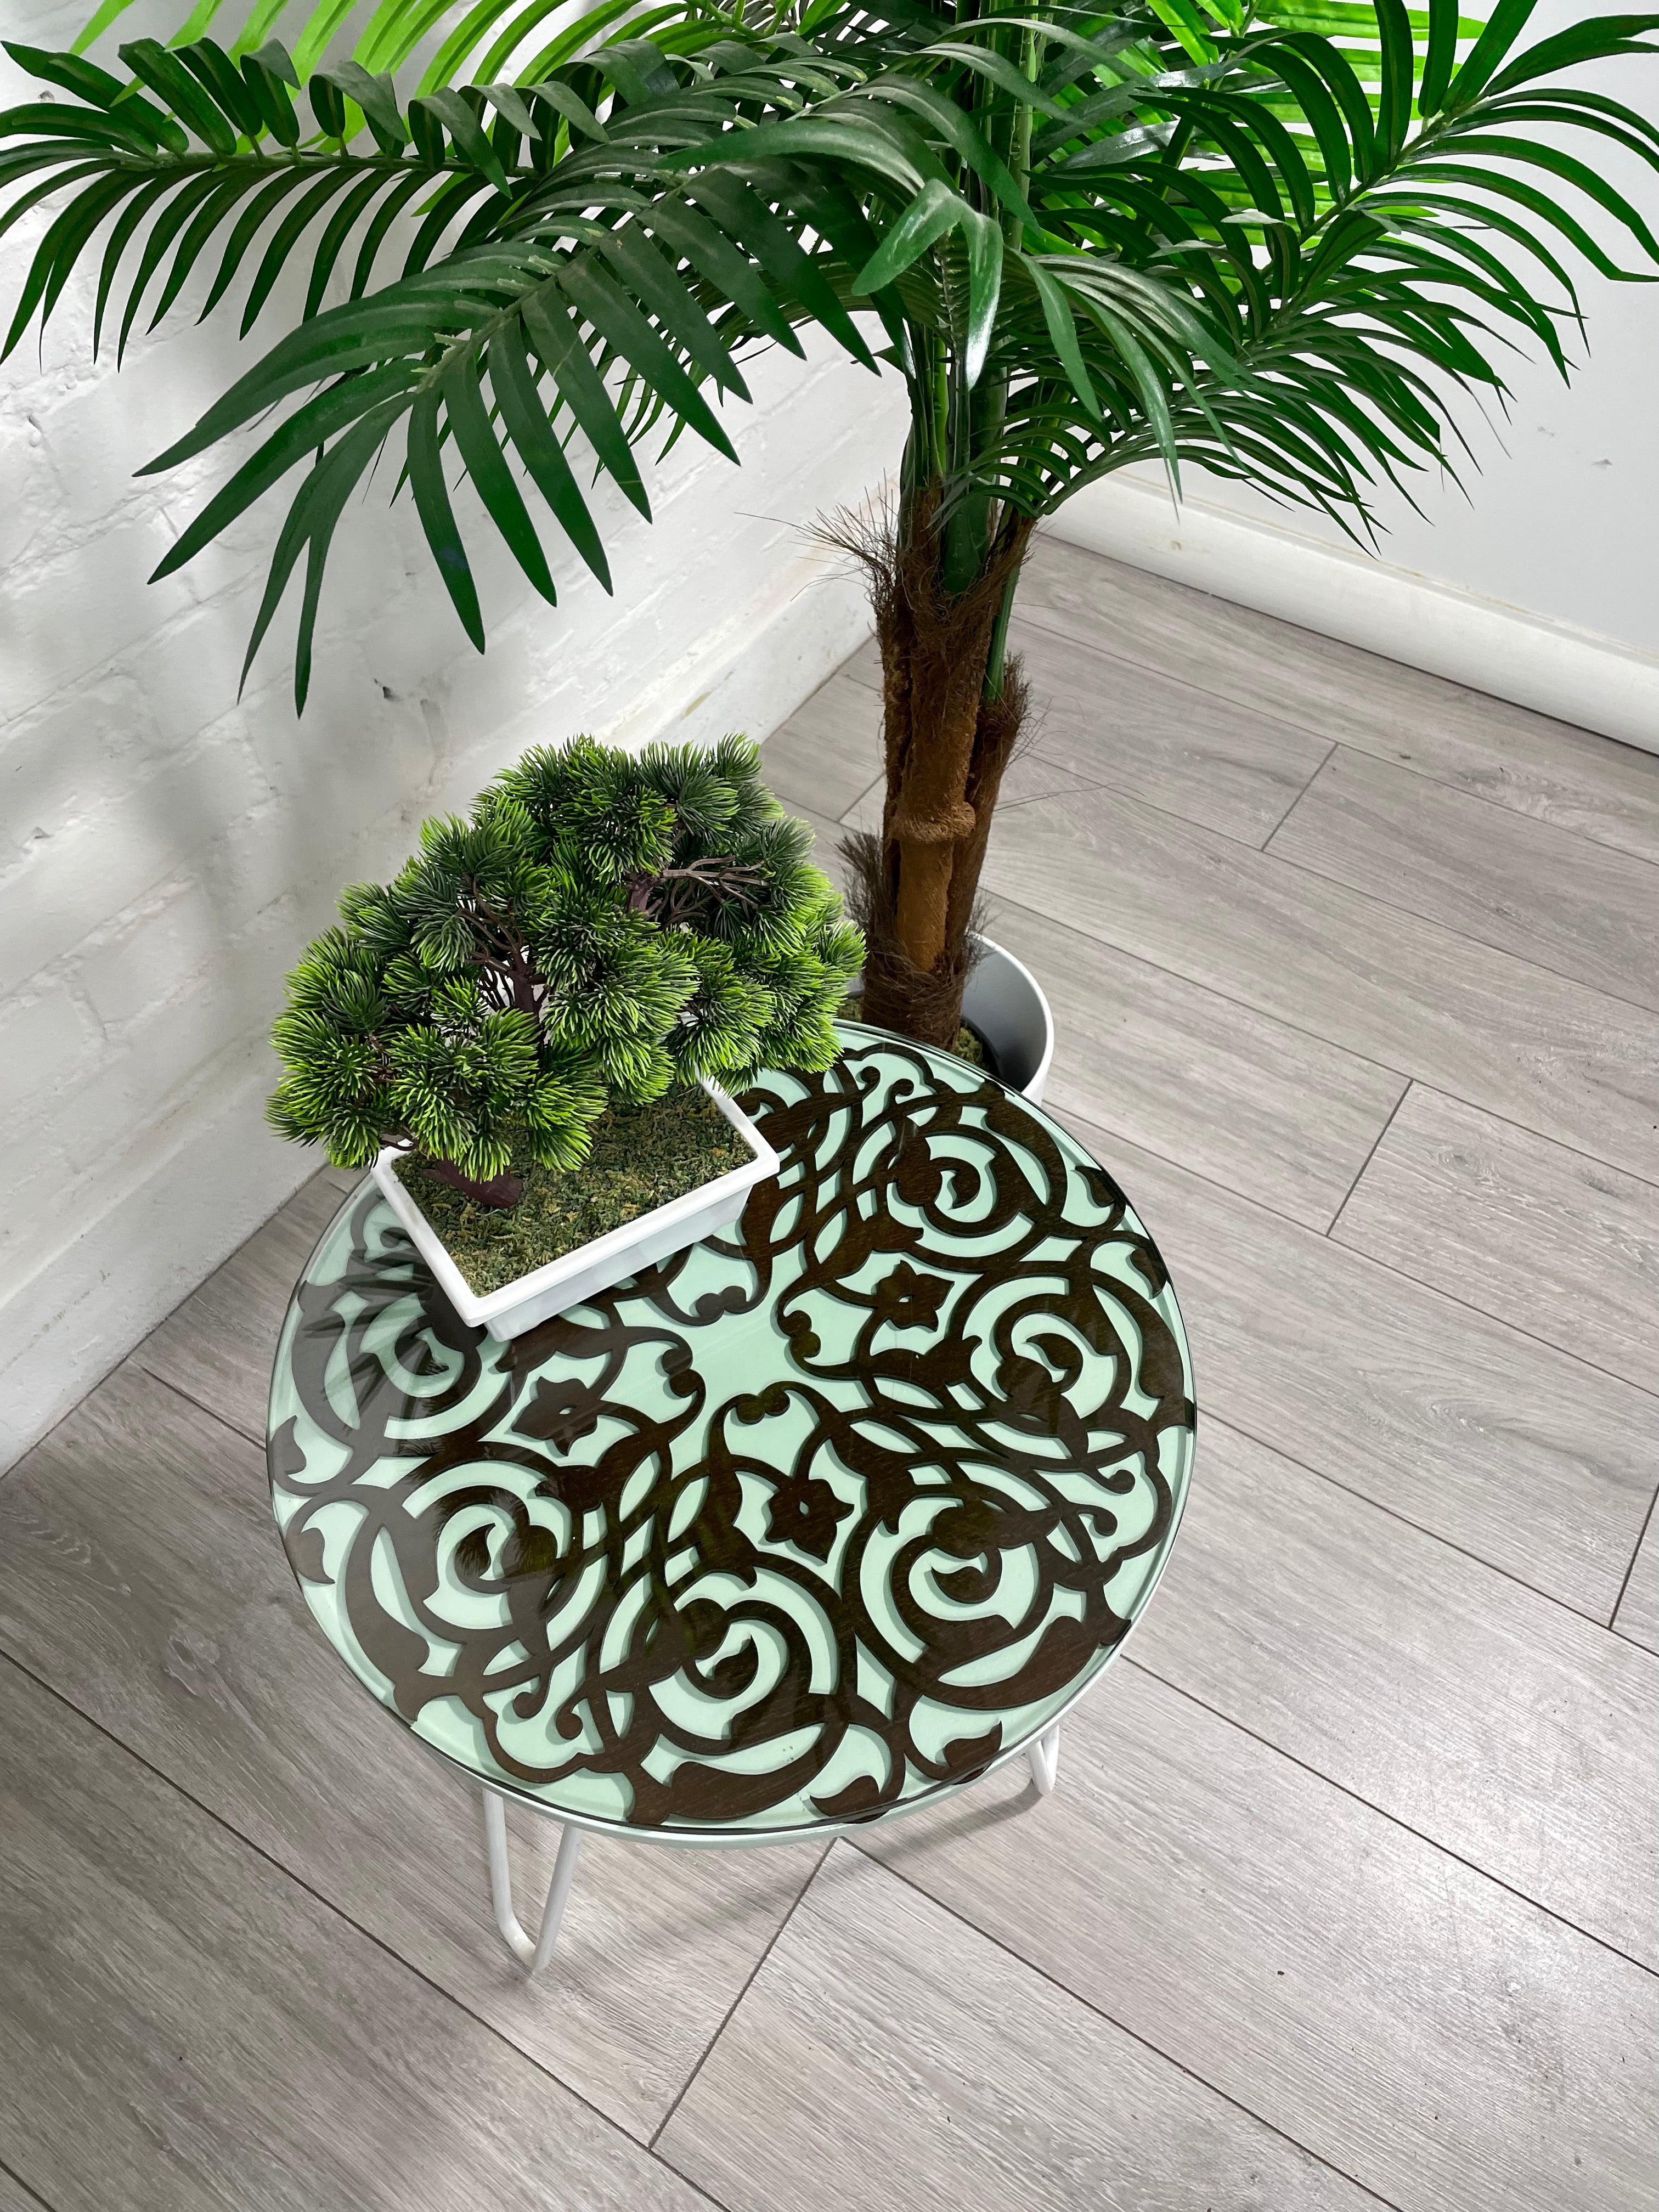 Green Pastel and Walnut finish side table with Arabesque fret work, glass top and Pin legs